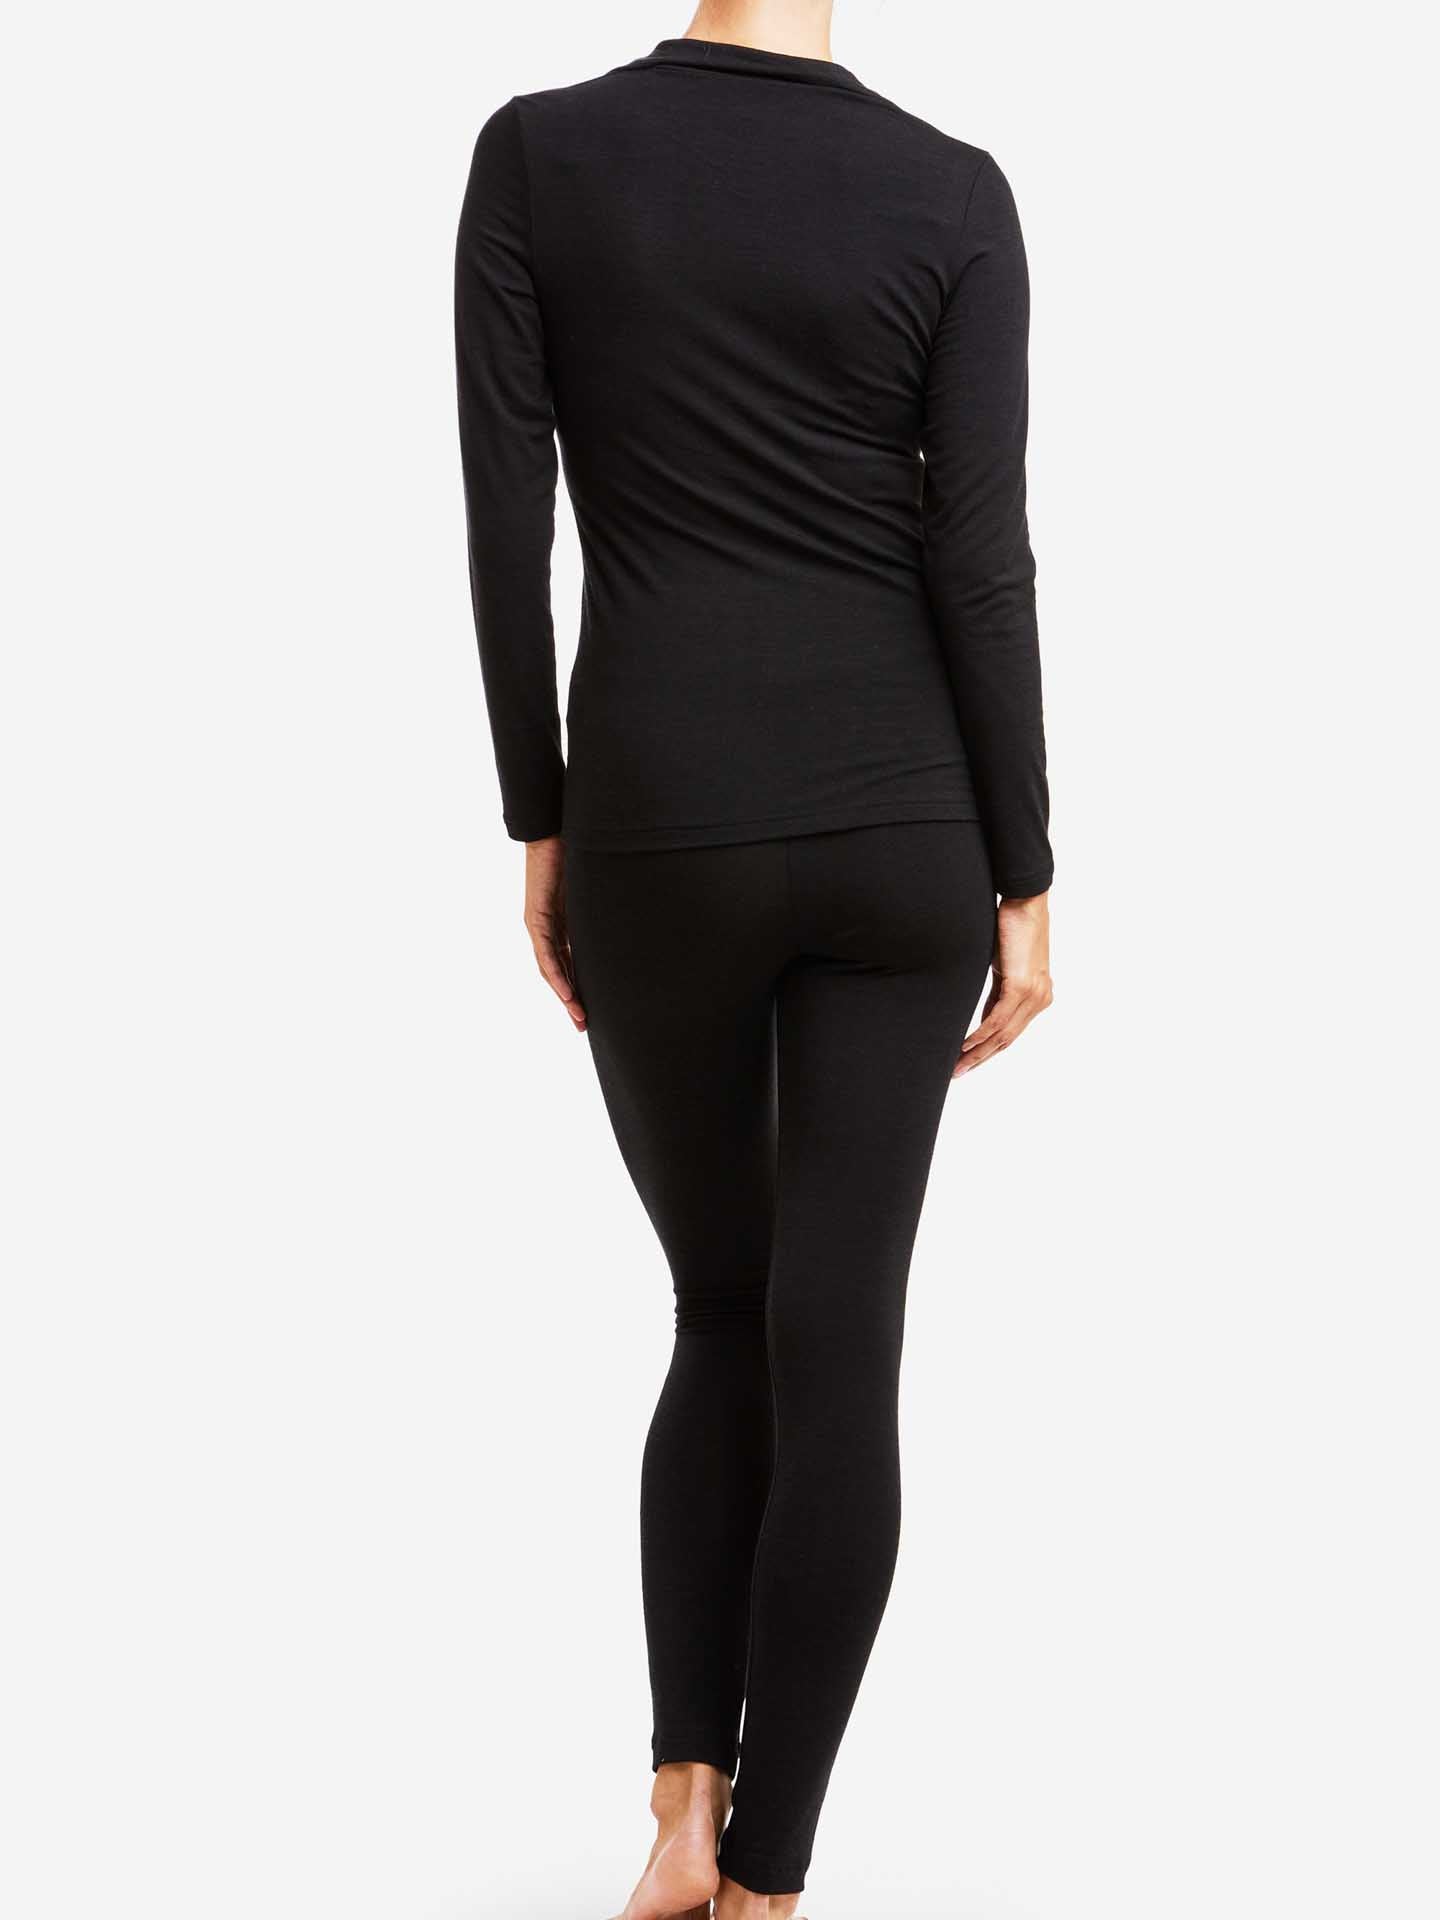 Cashmere and wool leggings